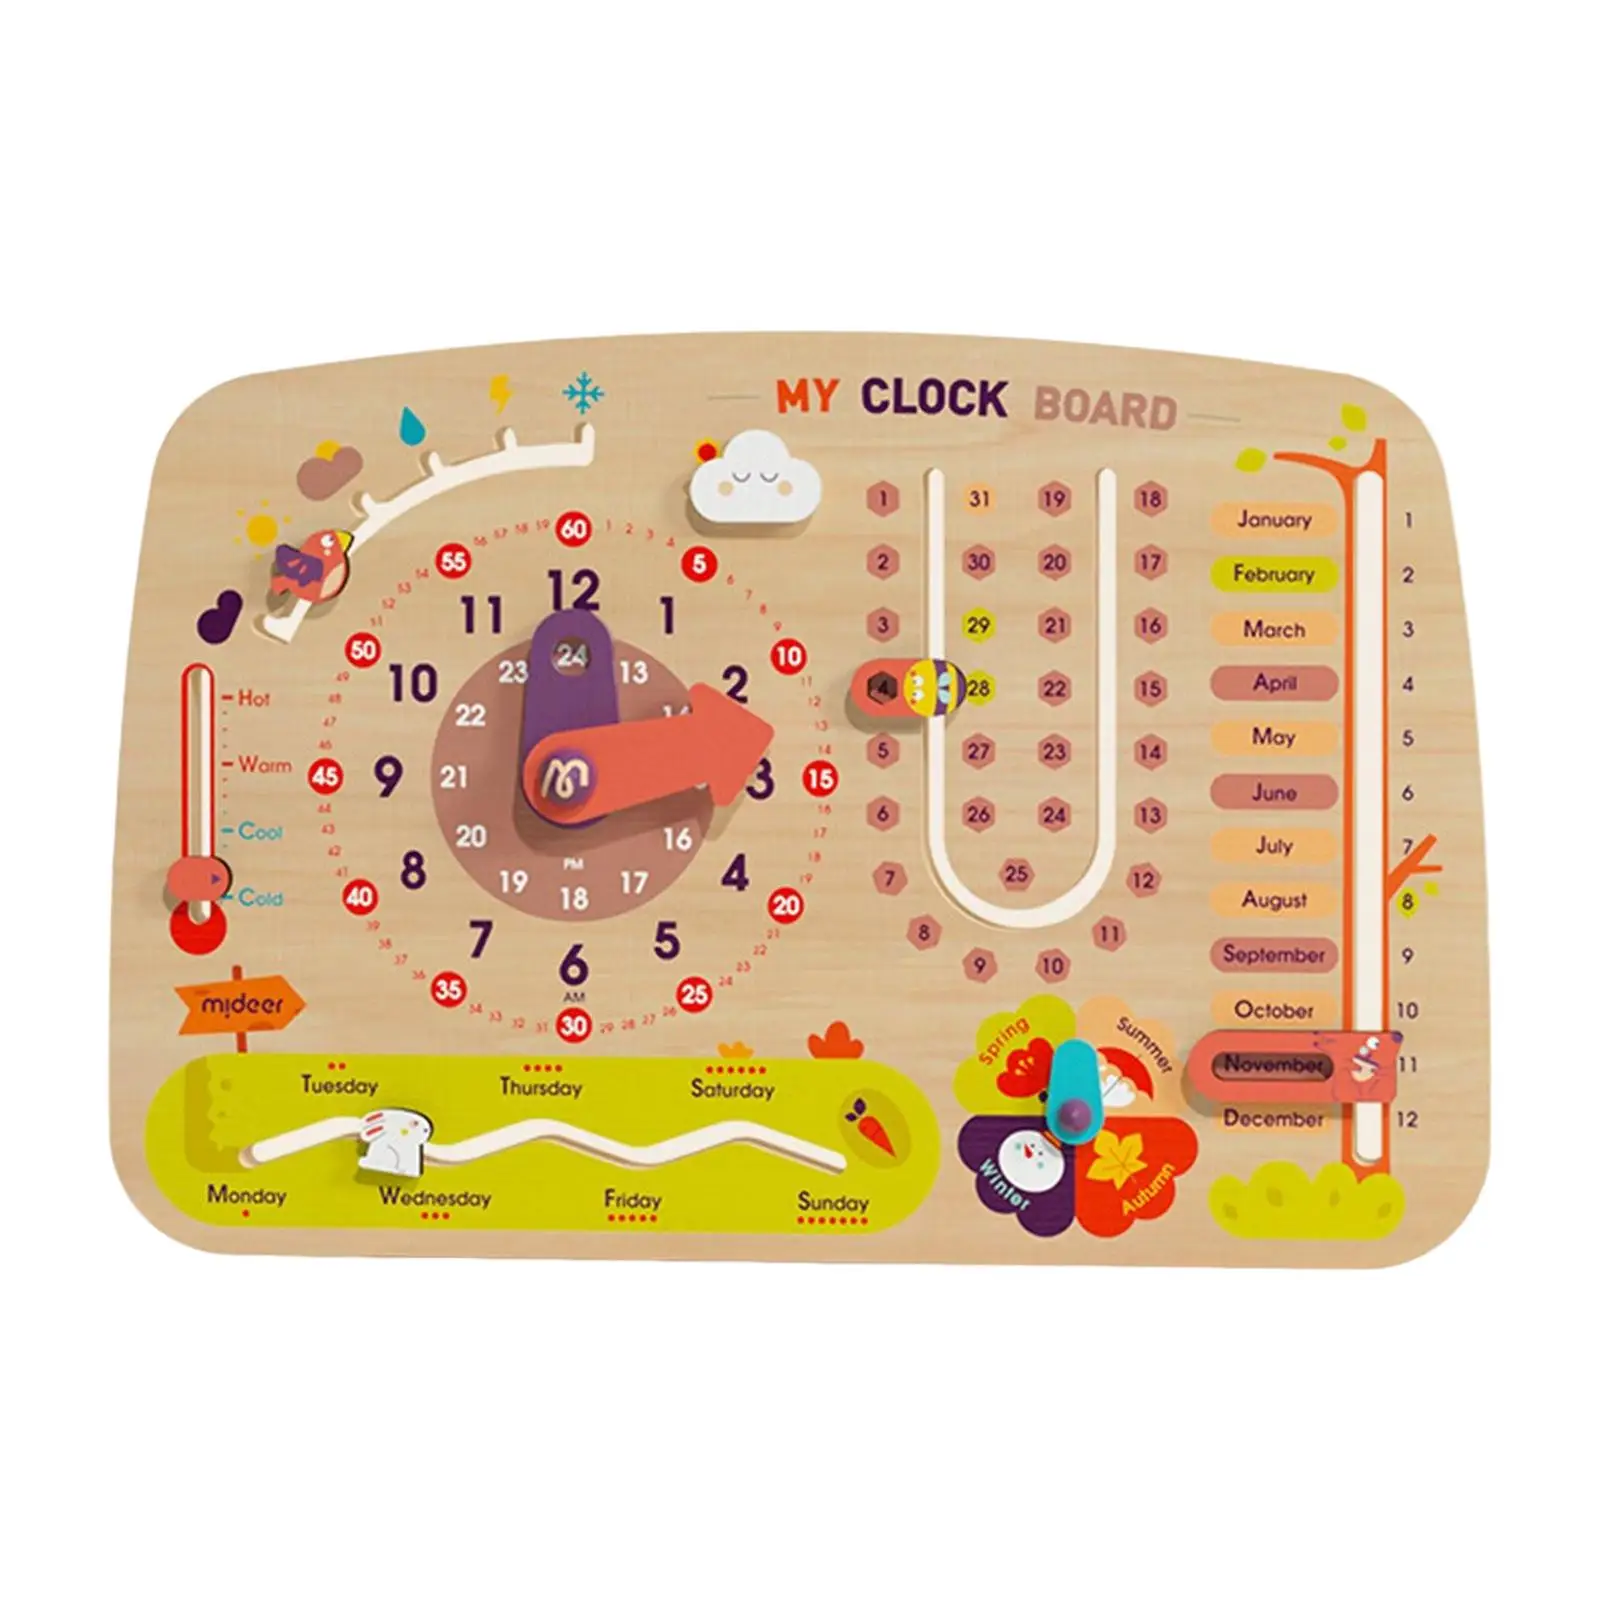 Kids Clock Calendar Today Monthly Weather Preschool Wooden All about Today Board Kids Daily Calendar for Kids Birthday Gifts